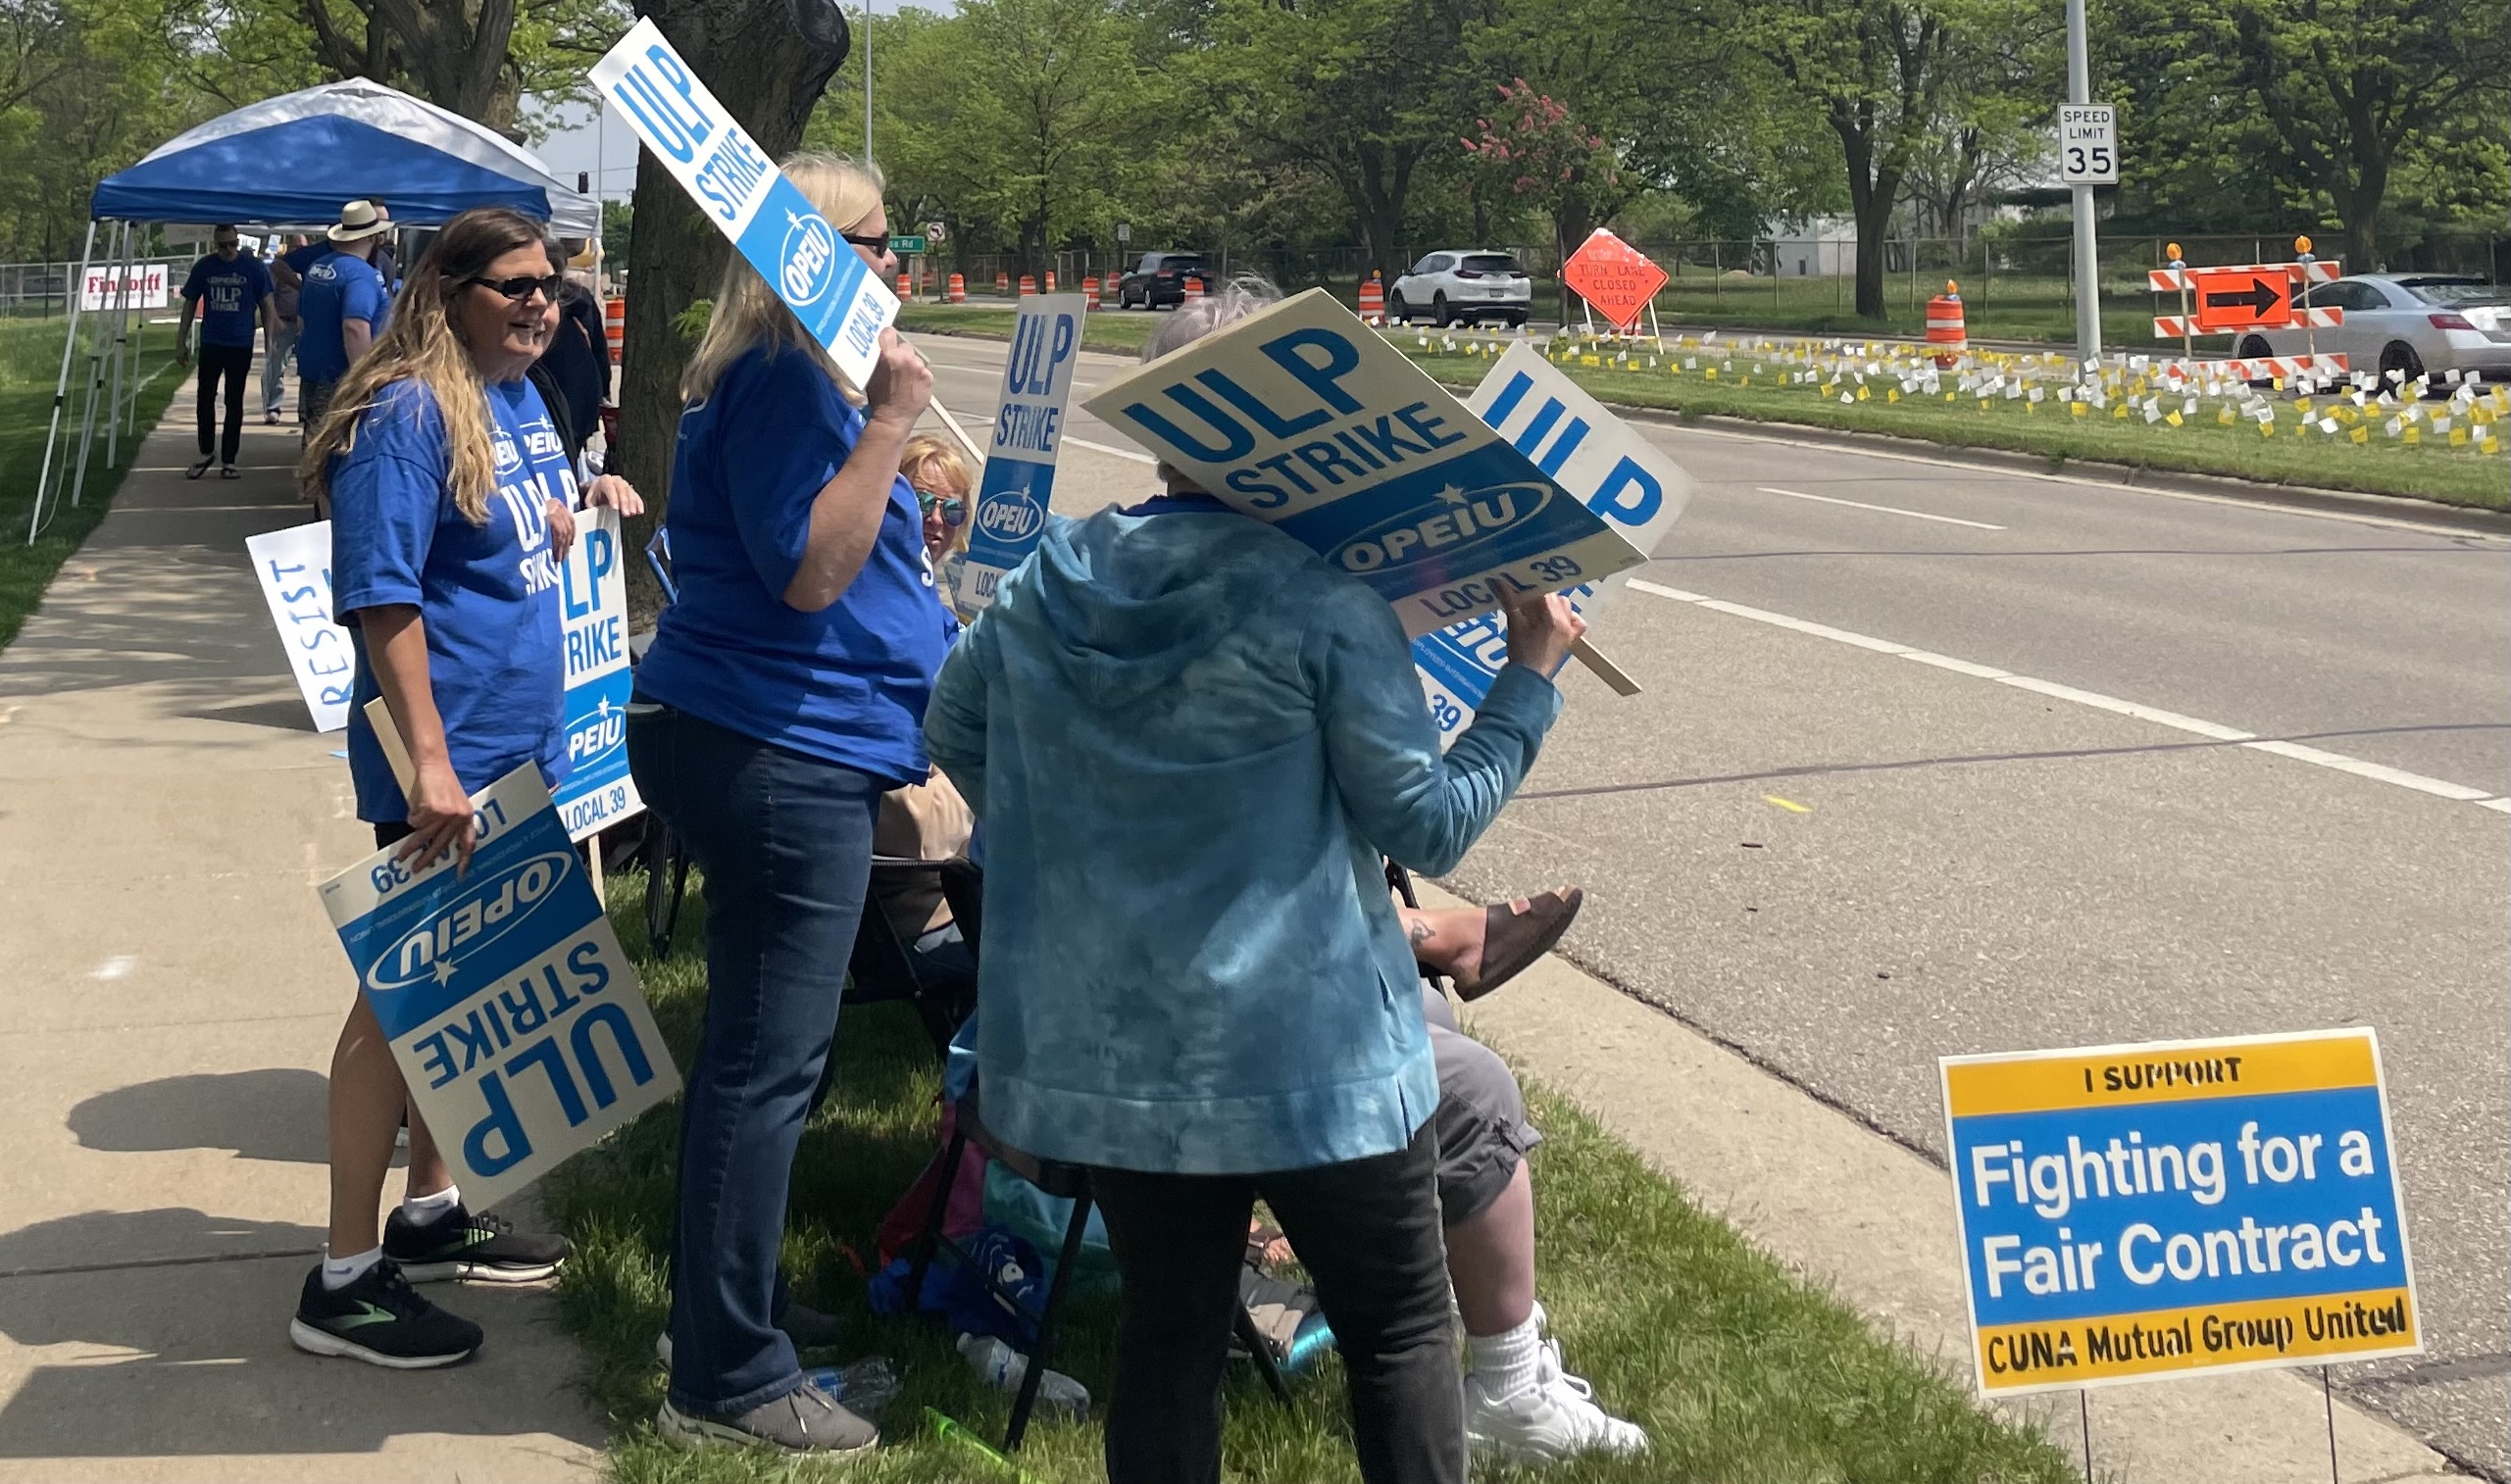 Union workers strike outside CUNA Mutual in Madison.